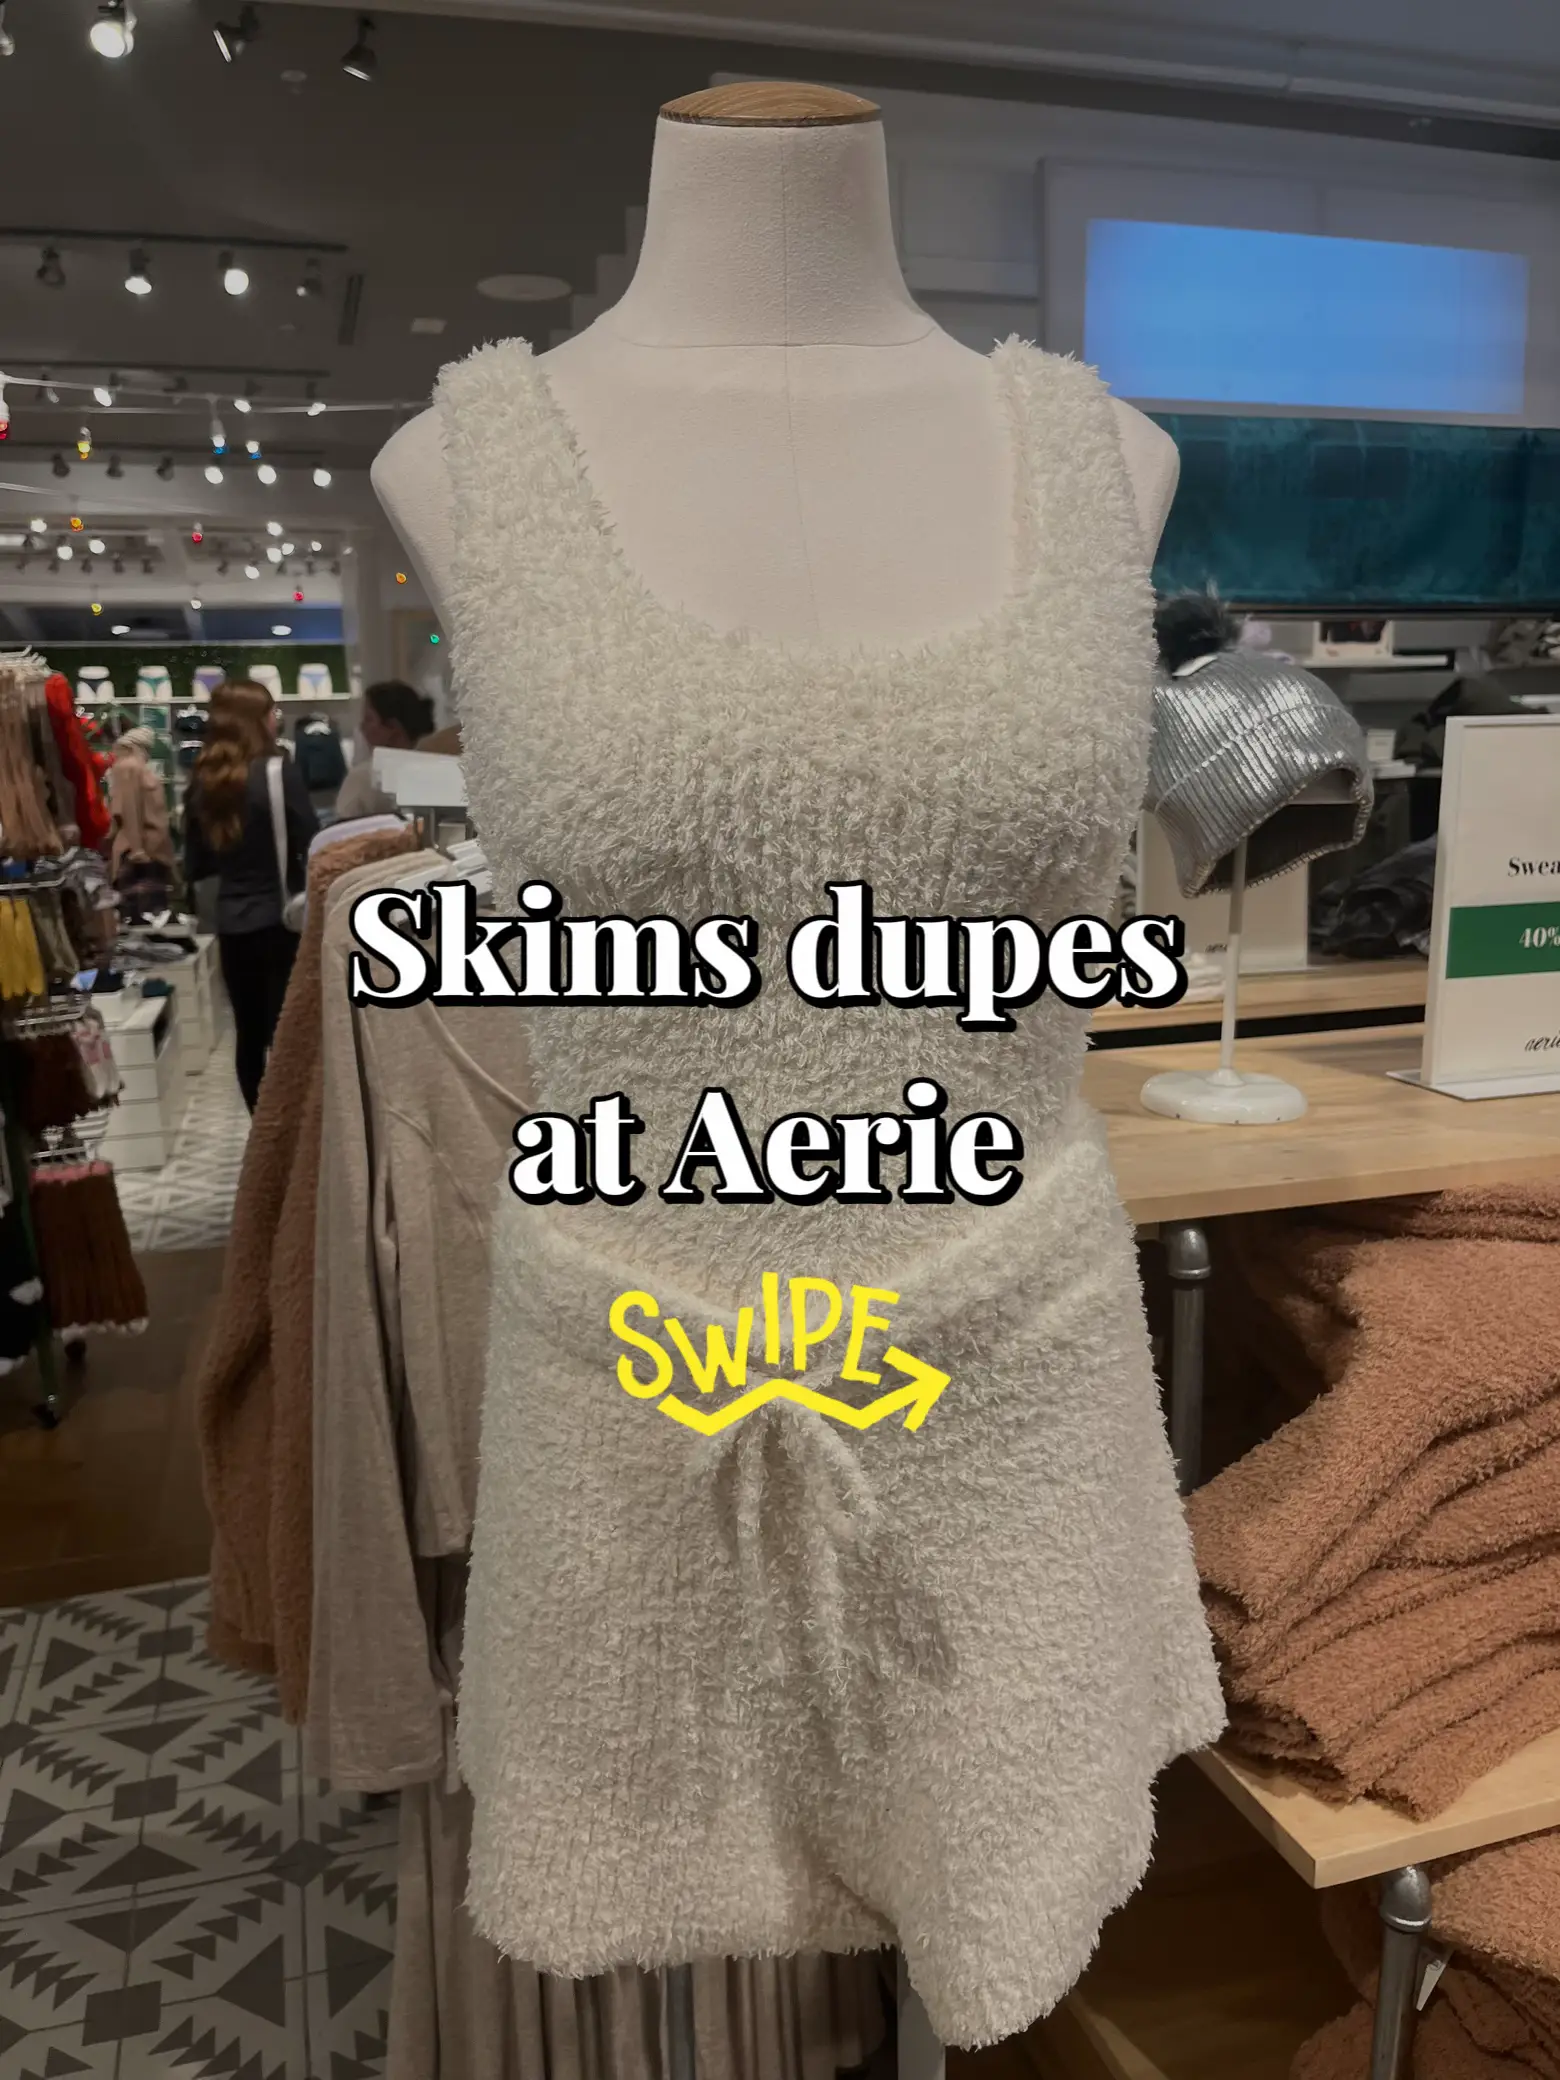 Skims dupes at Aerie🫶, Gallery posted by Alaina Wodarek